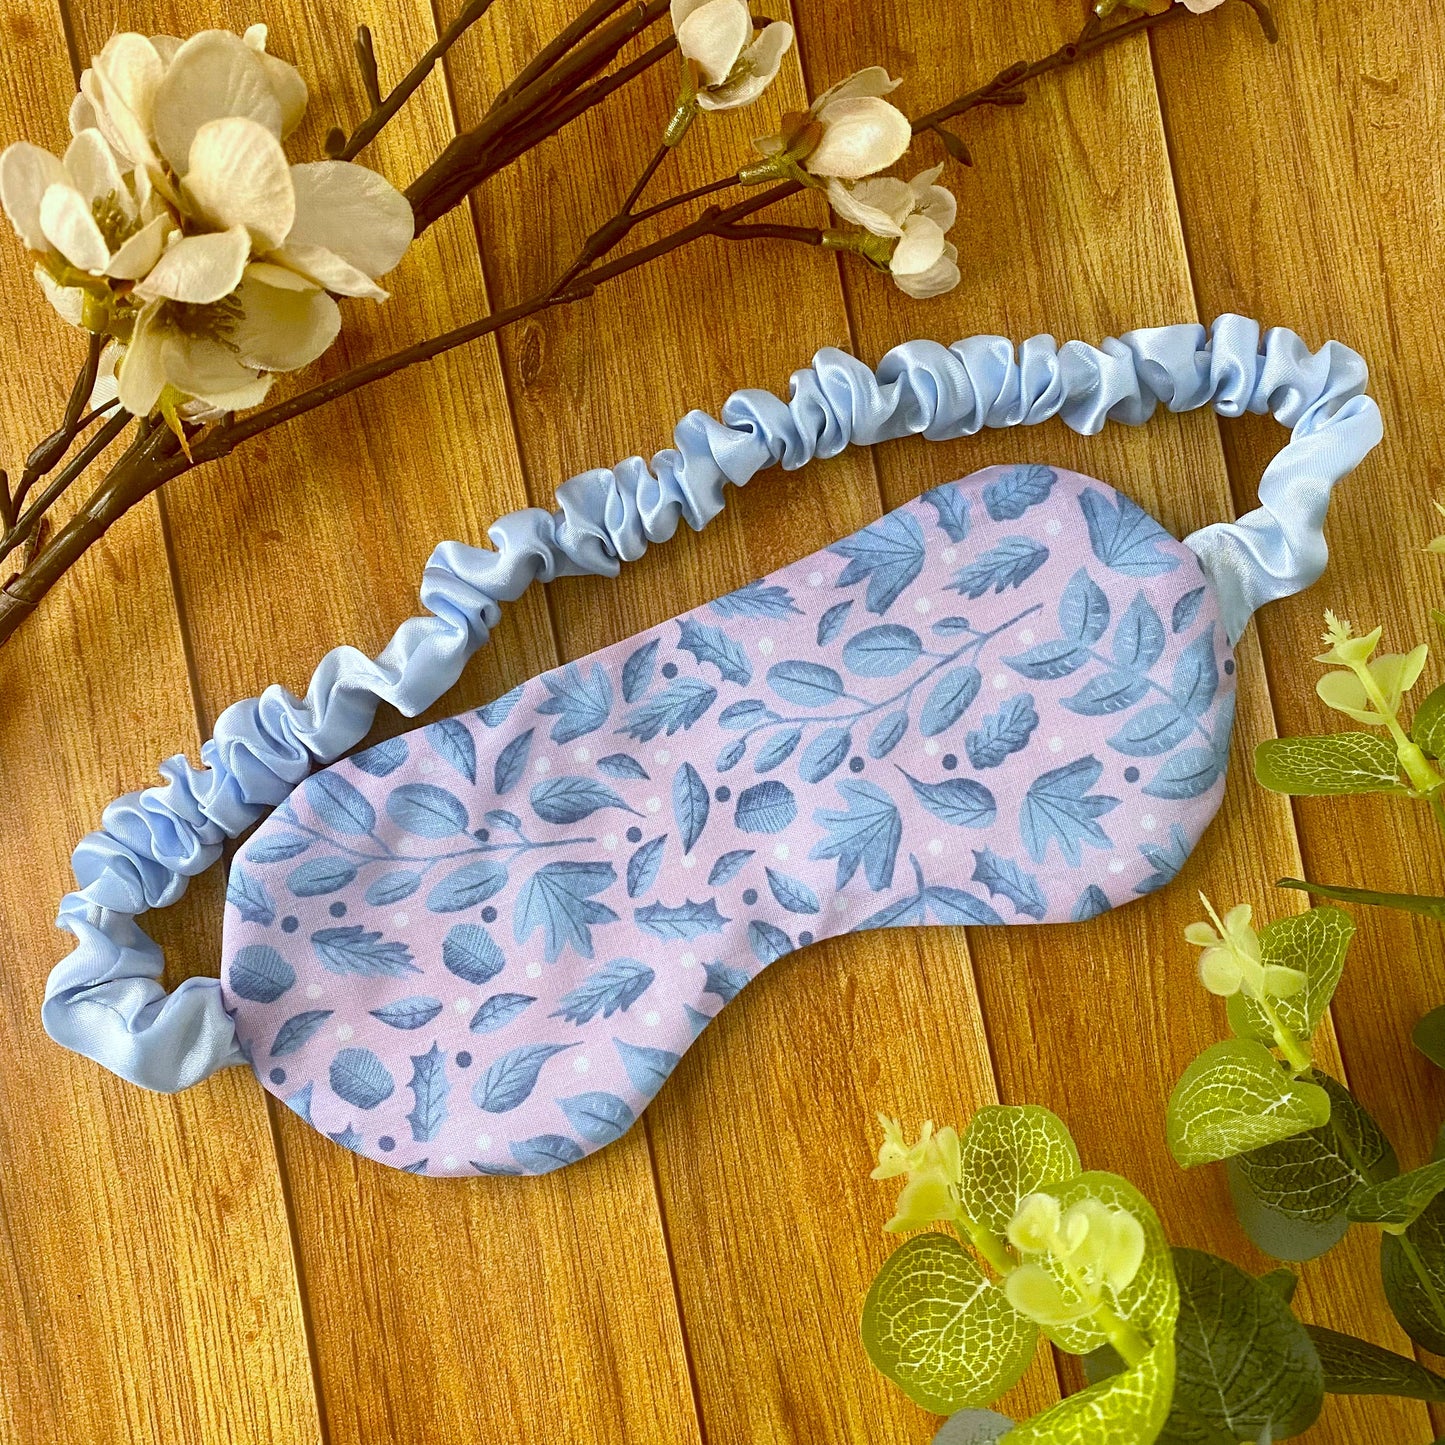 blue and pink foliage pattern design on a sleepmask, with a blue scrunched strap